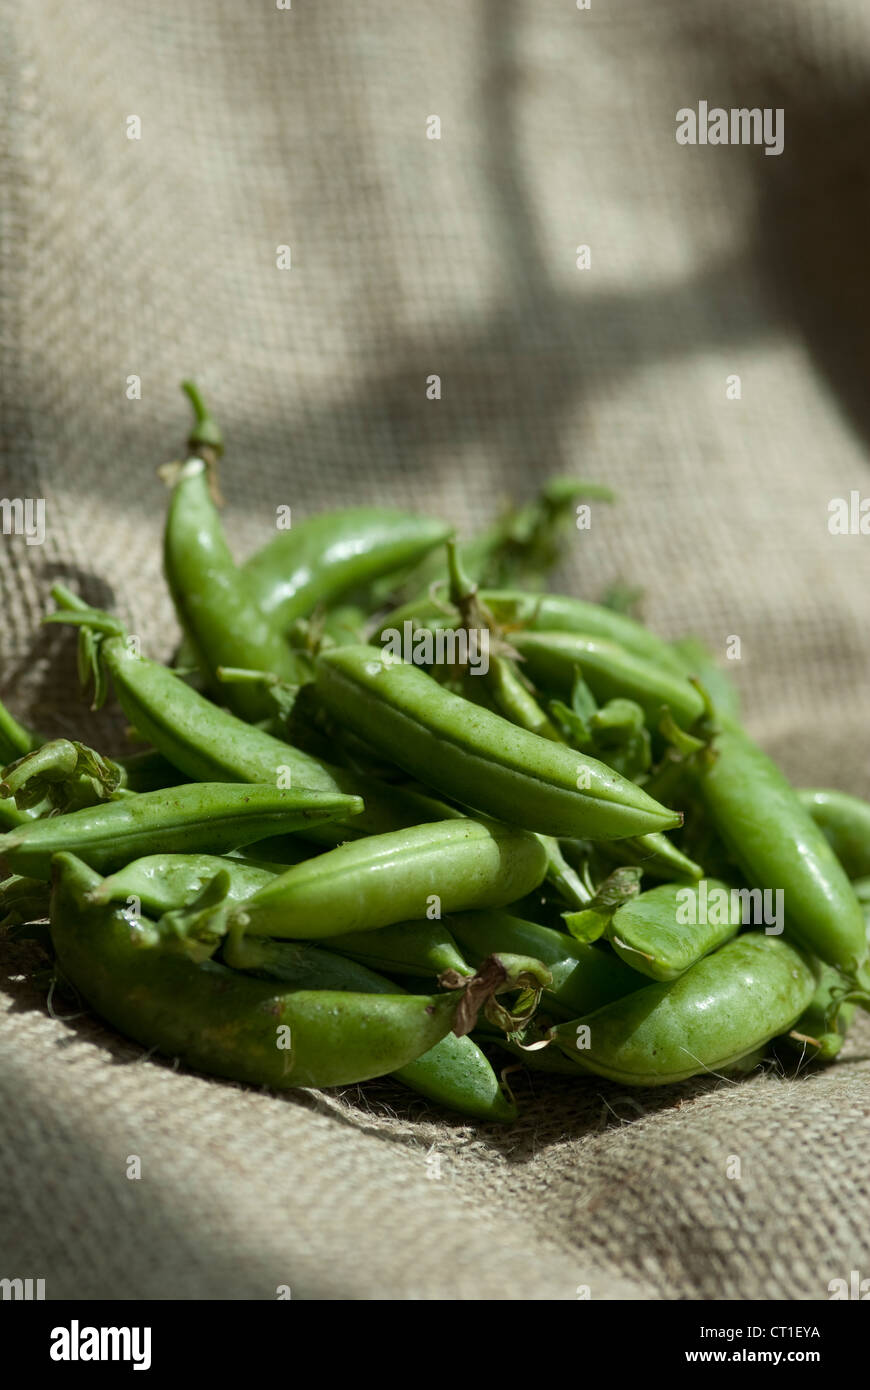 Organic Sugar Snap peas in their shells on a hessian background in dappled light Stock Photo